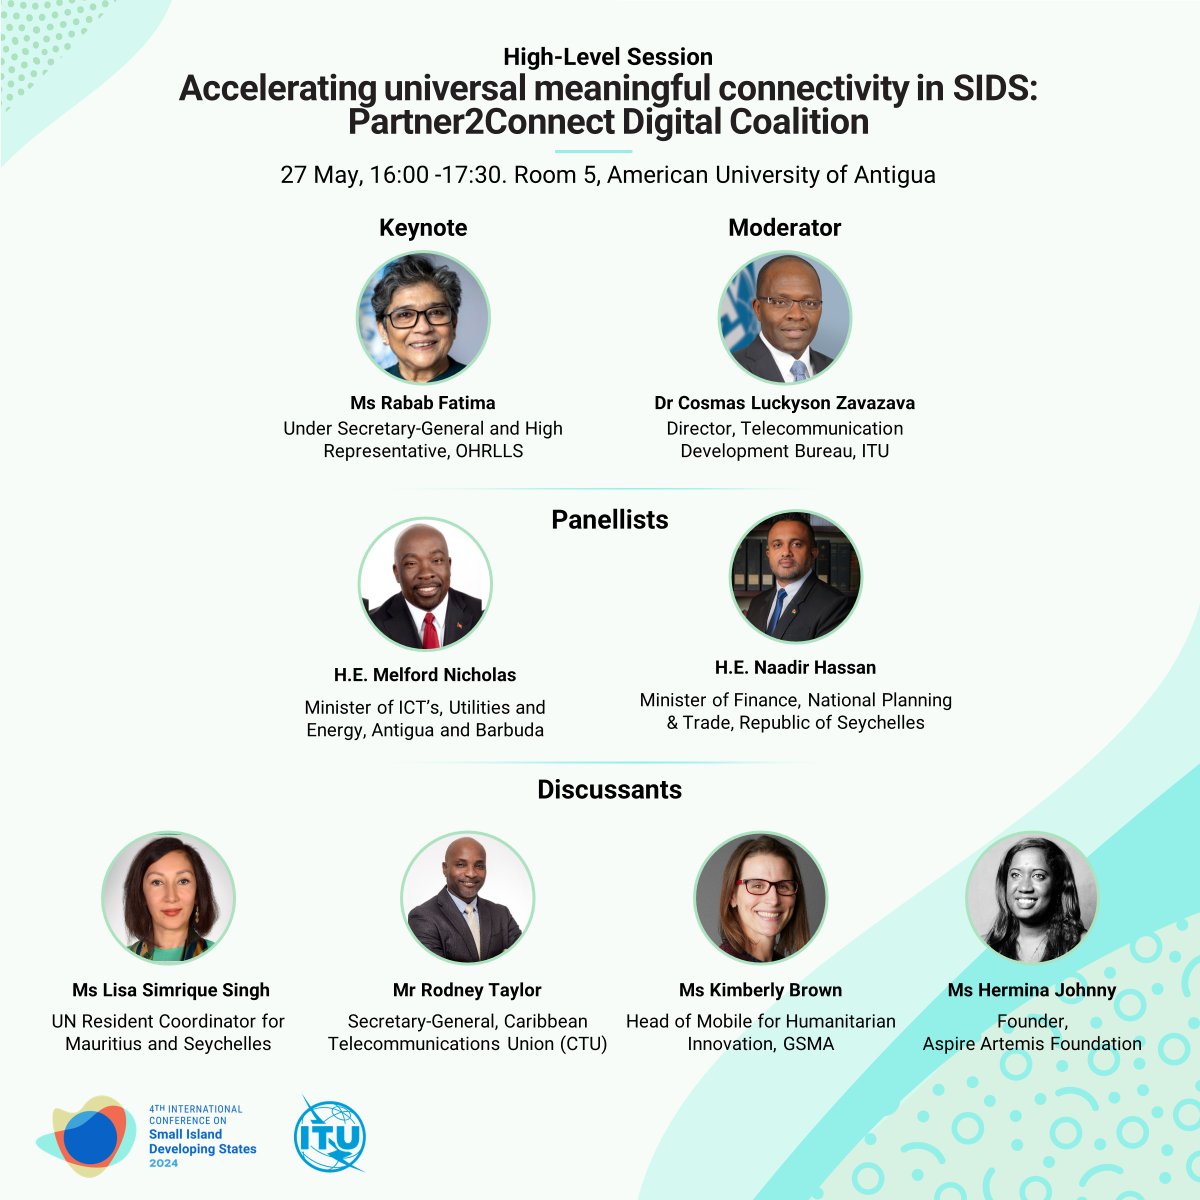 Join @ITU at #SIDS4 to hear from prominent policymakers & practitioners who will share their experiences, challenges & solutions to accelerate progress towards universal & #MeaningfulConnectivity. #SIDS
27 May, 16:00-17:30, Room 5
Details ➡️ itu.int/itu-d/sites/ld…